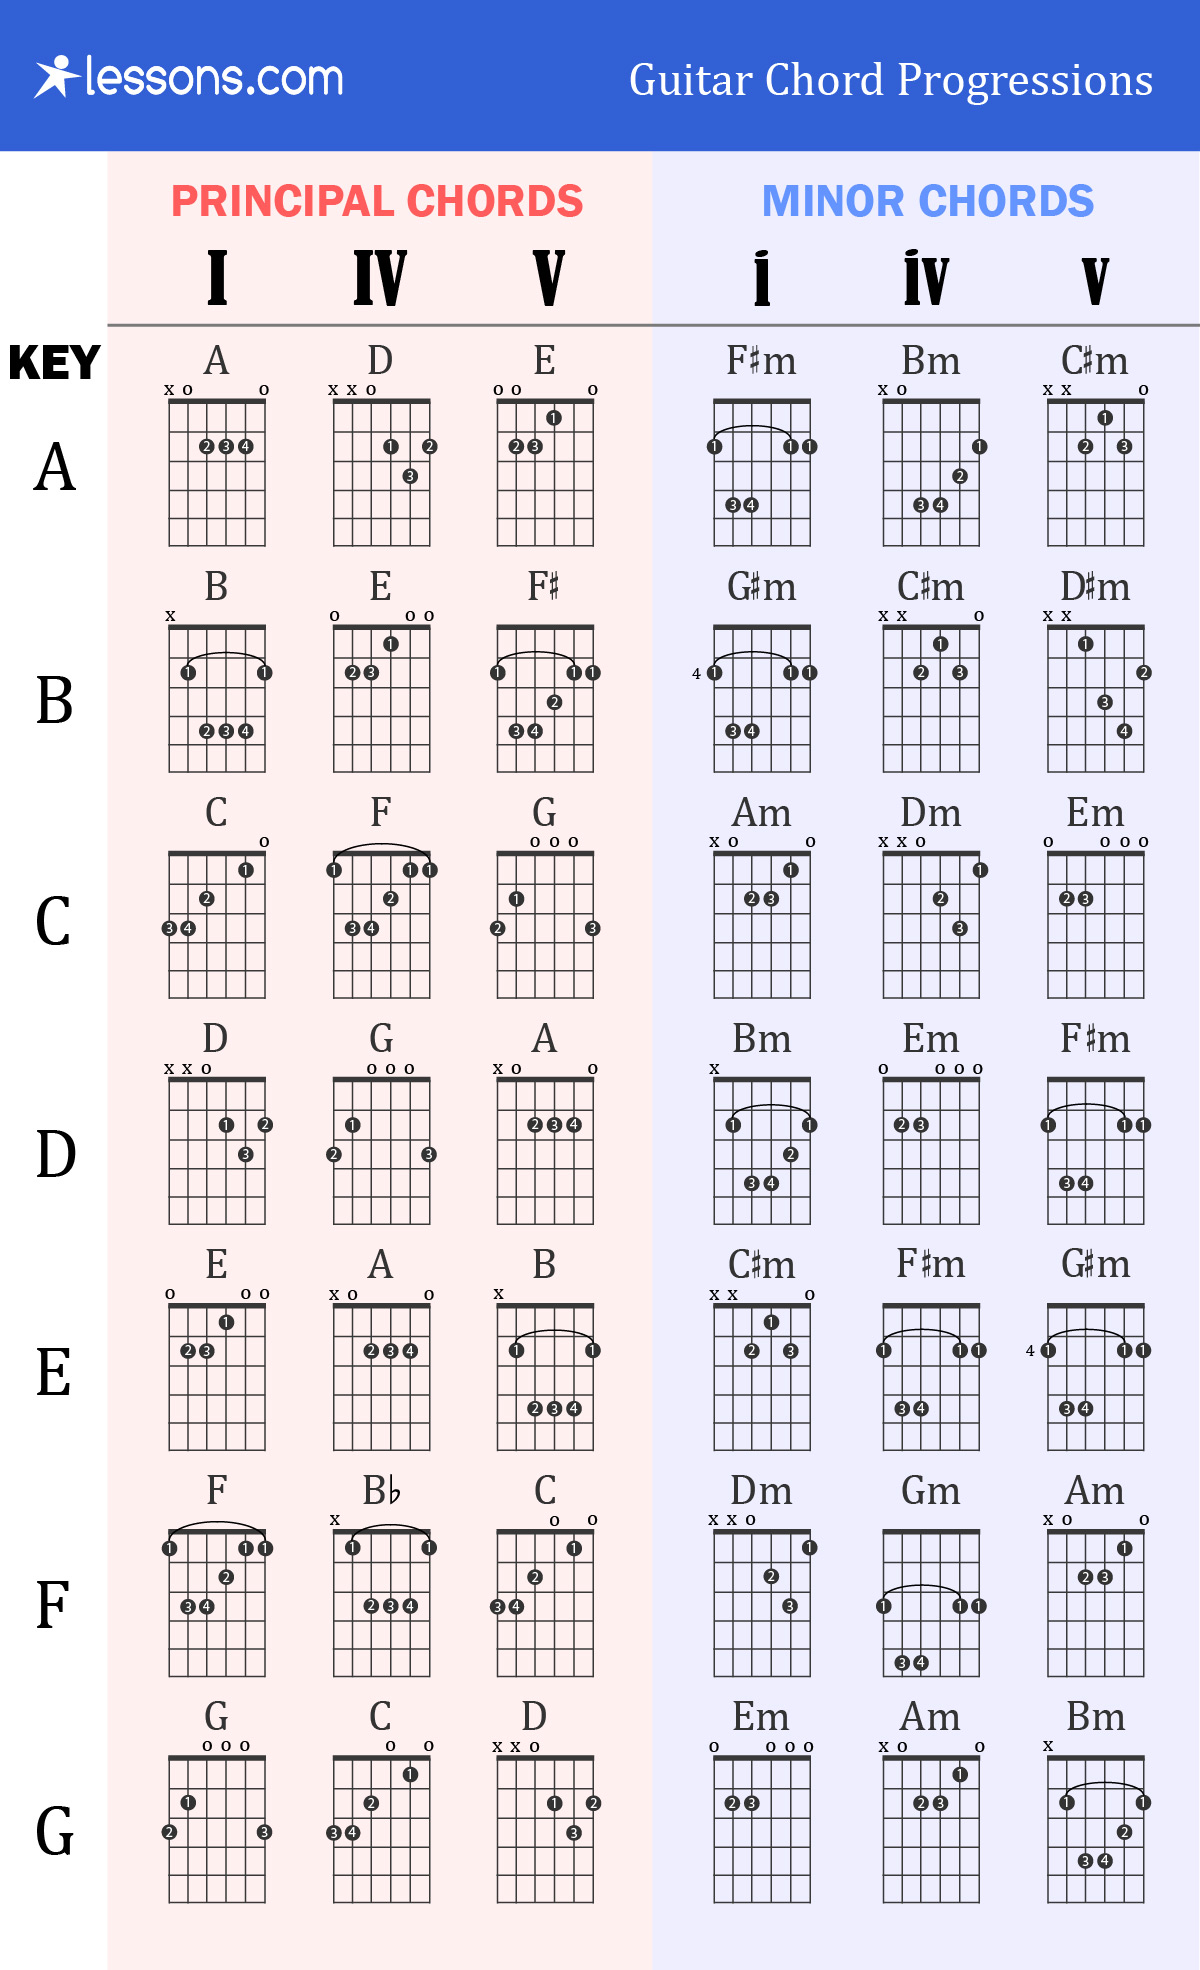 C M Guitar Chord Guitar Chords The Complete Guide With Charts How Tos More